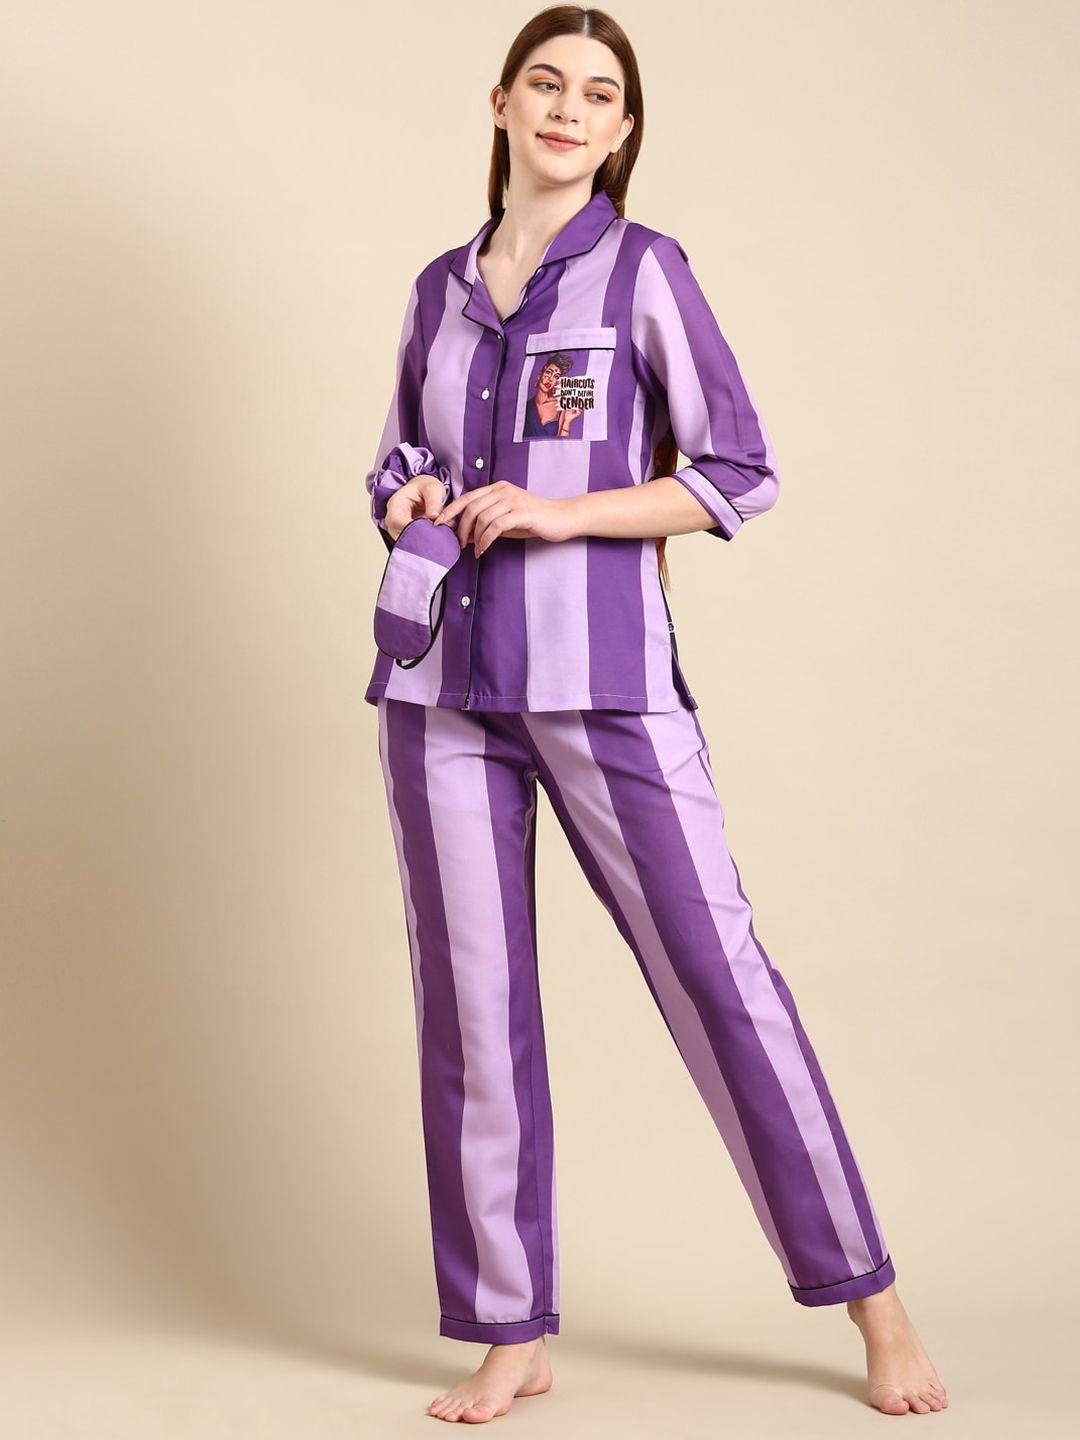 bannos-swagger-purple-&-black-striped-night-suit